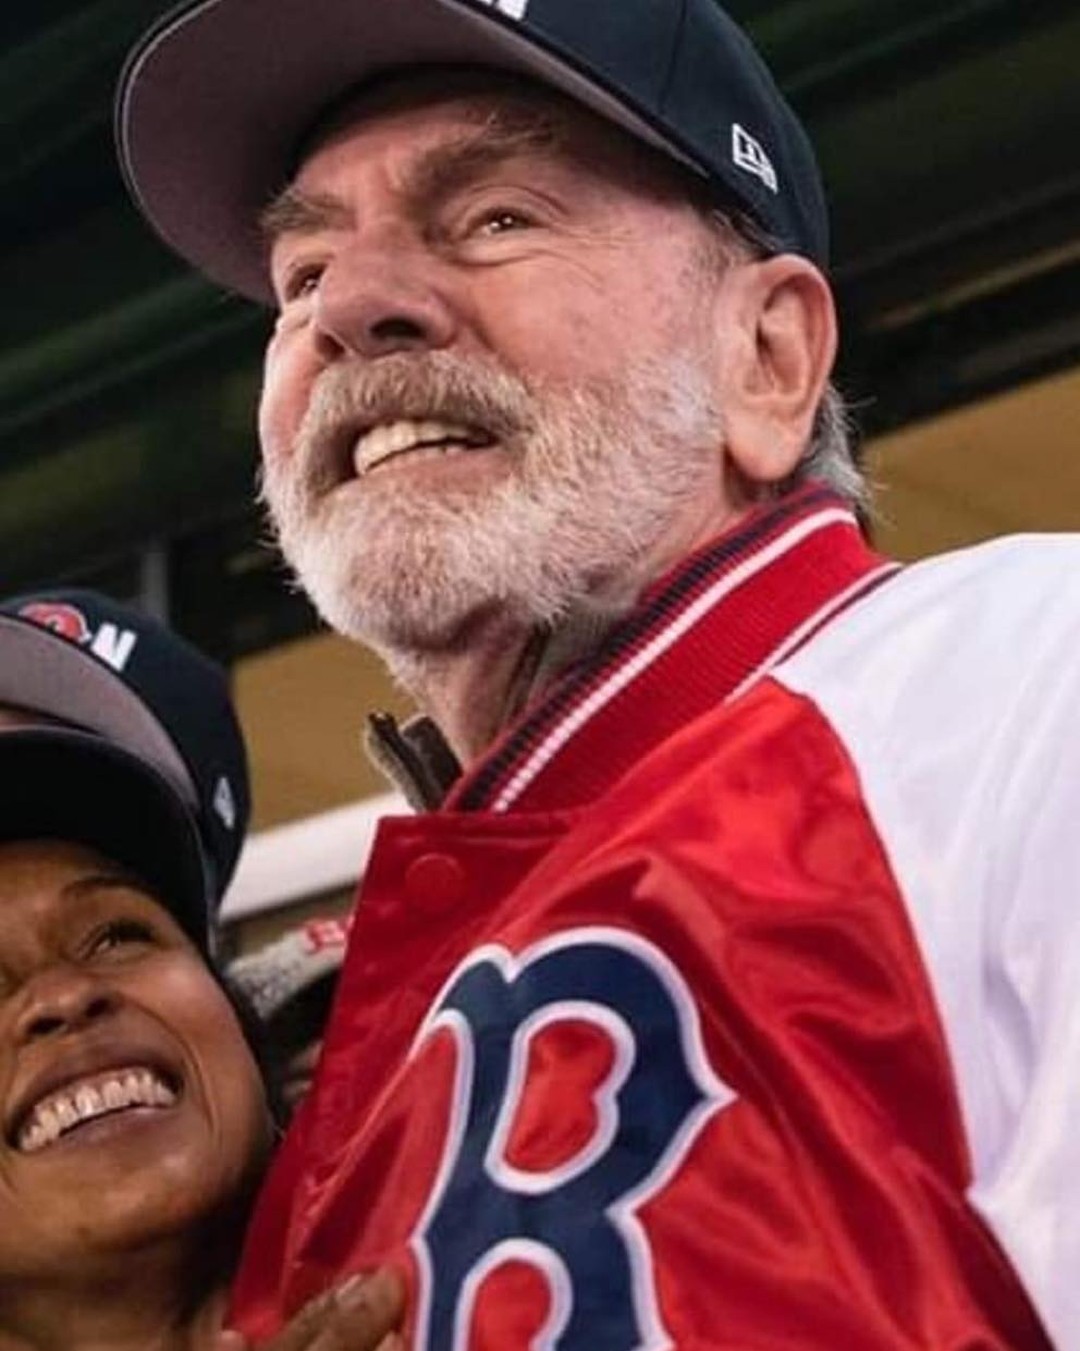 The legend and our musical hero, Mr. Neil Diamond looking so well at a Boston Red Sox game this week. ❤️💎 

God bless this man 🙏🏼🙏🏿